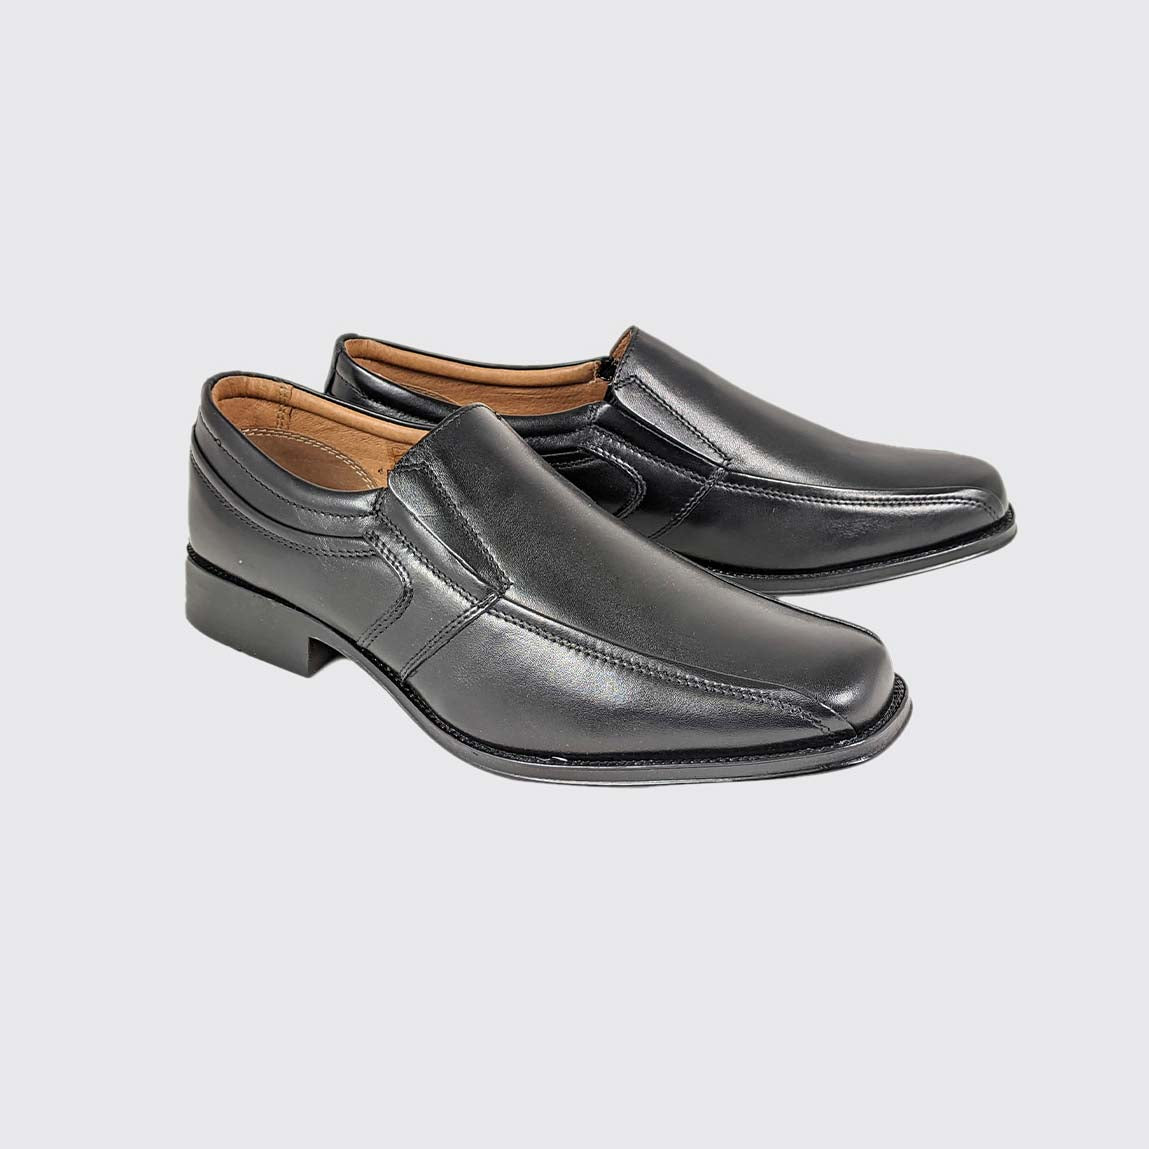 Angled view of the Dubarry Declan Black slip-on shoe.